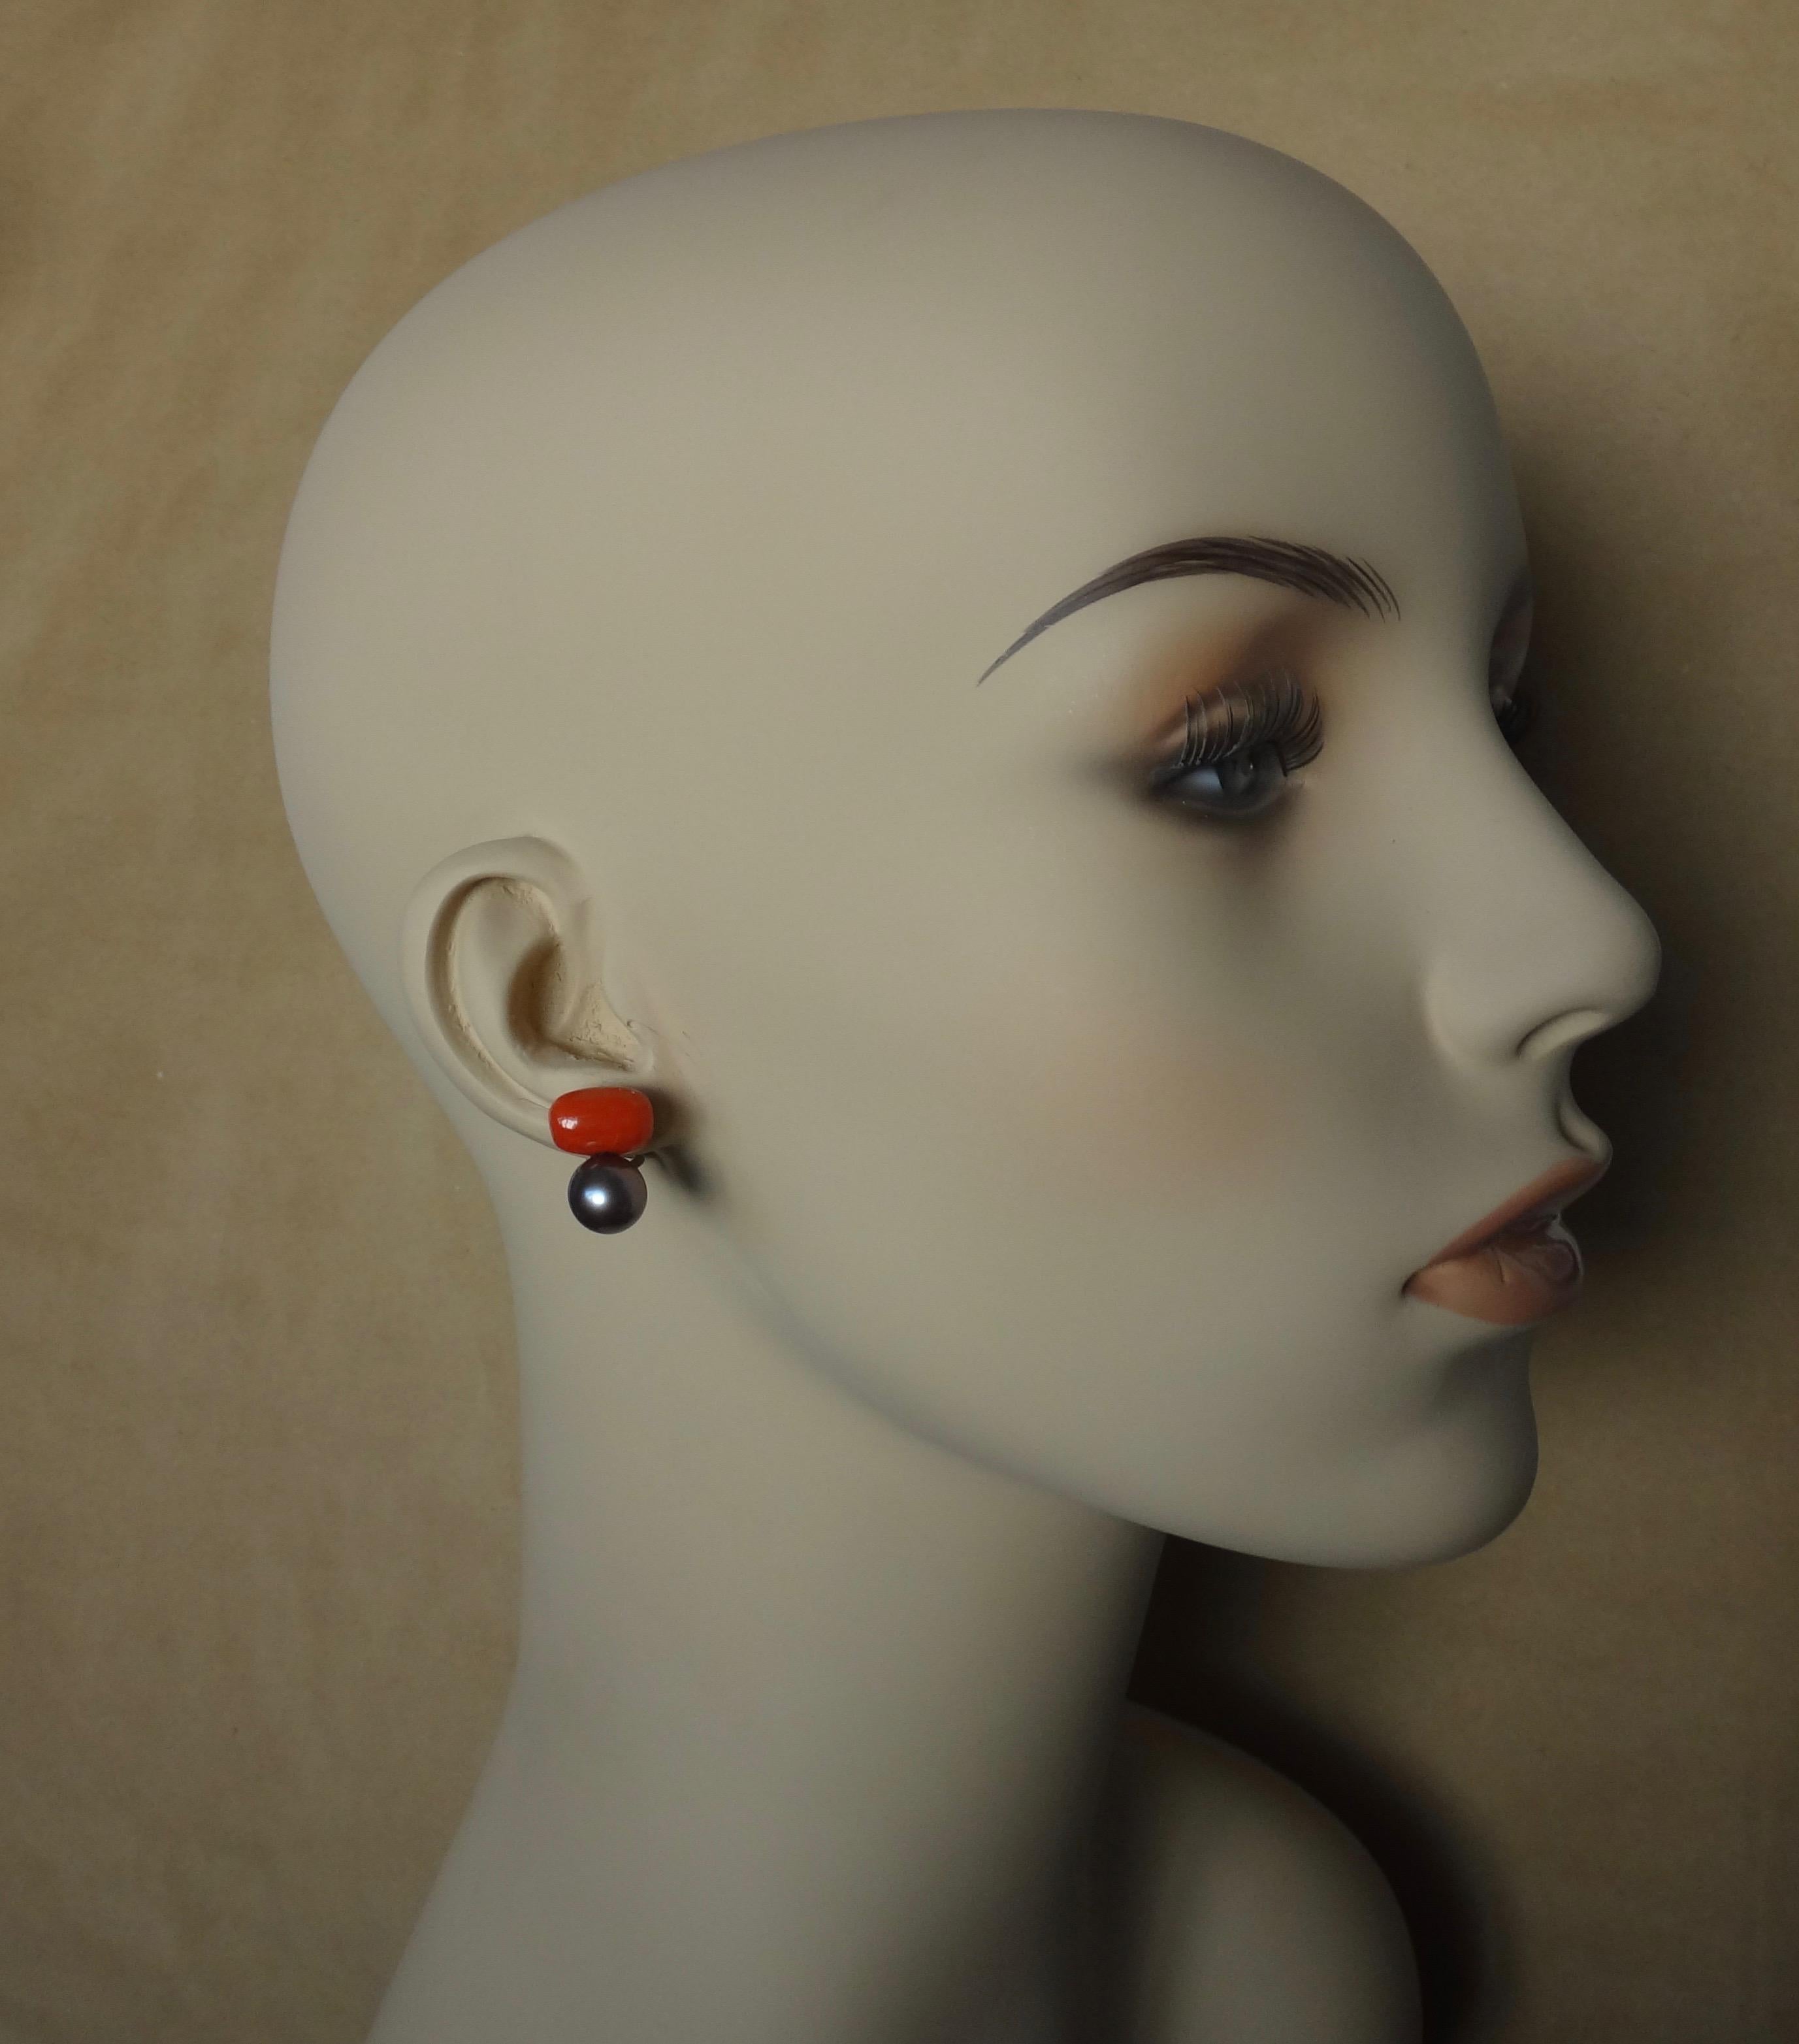 A beautifully matched pair of Mediterranean red corals are featured in these two stone, stud earrings.  The coral are a rich tomato red color and are highly polished.  Complimenting those gems are a pair of dark gray Tahitian pearls which possess